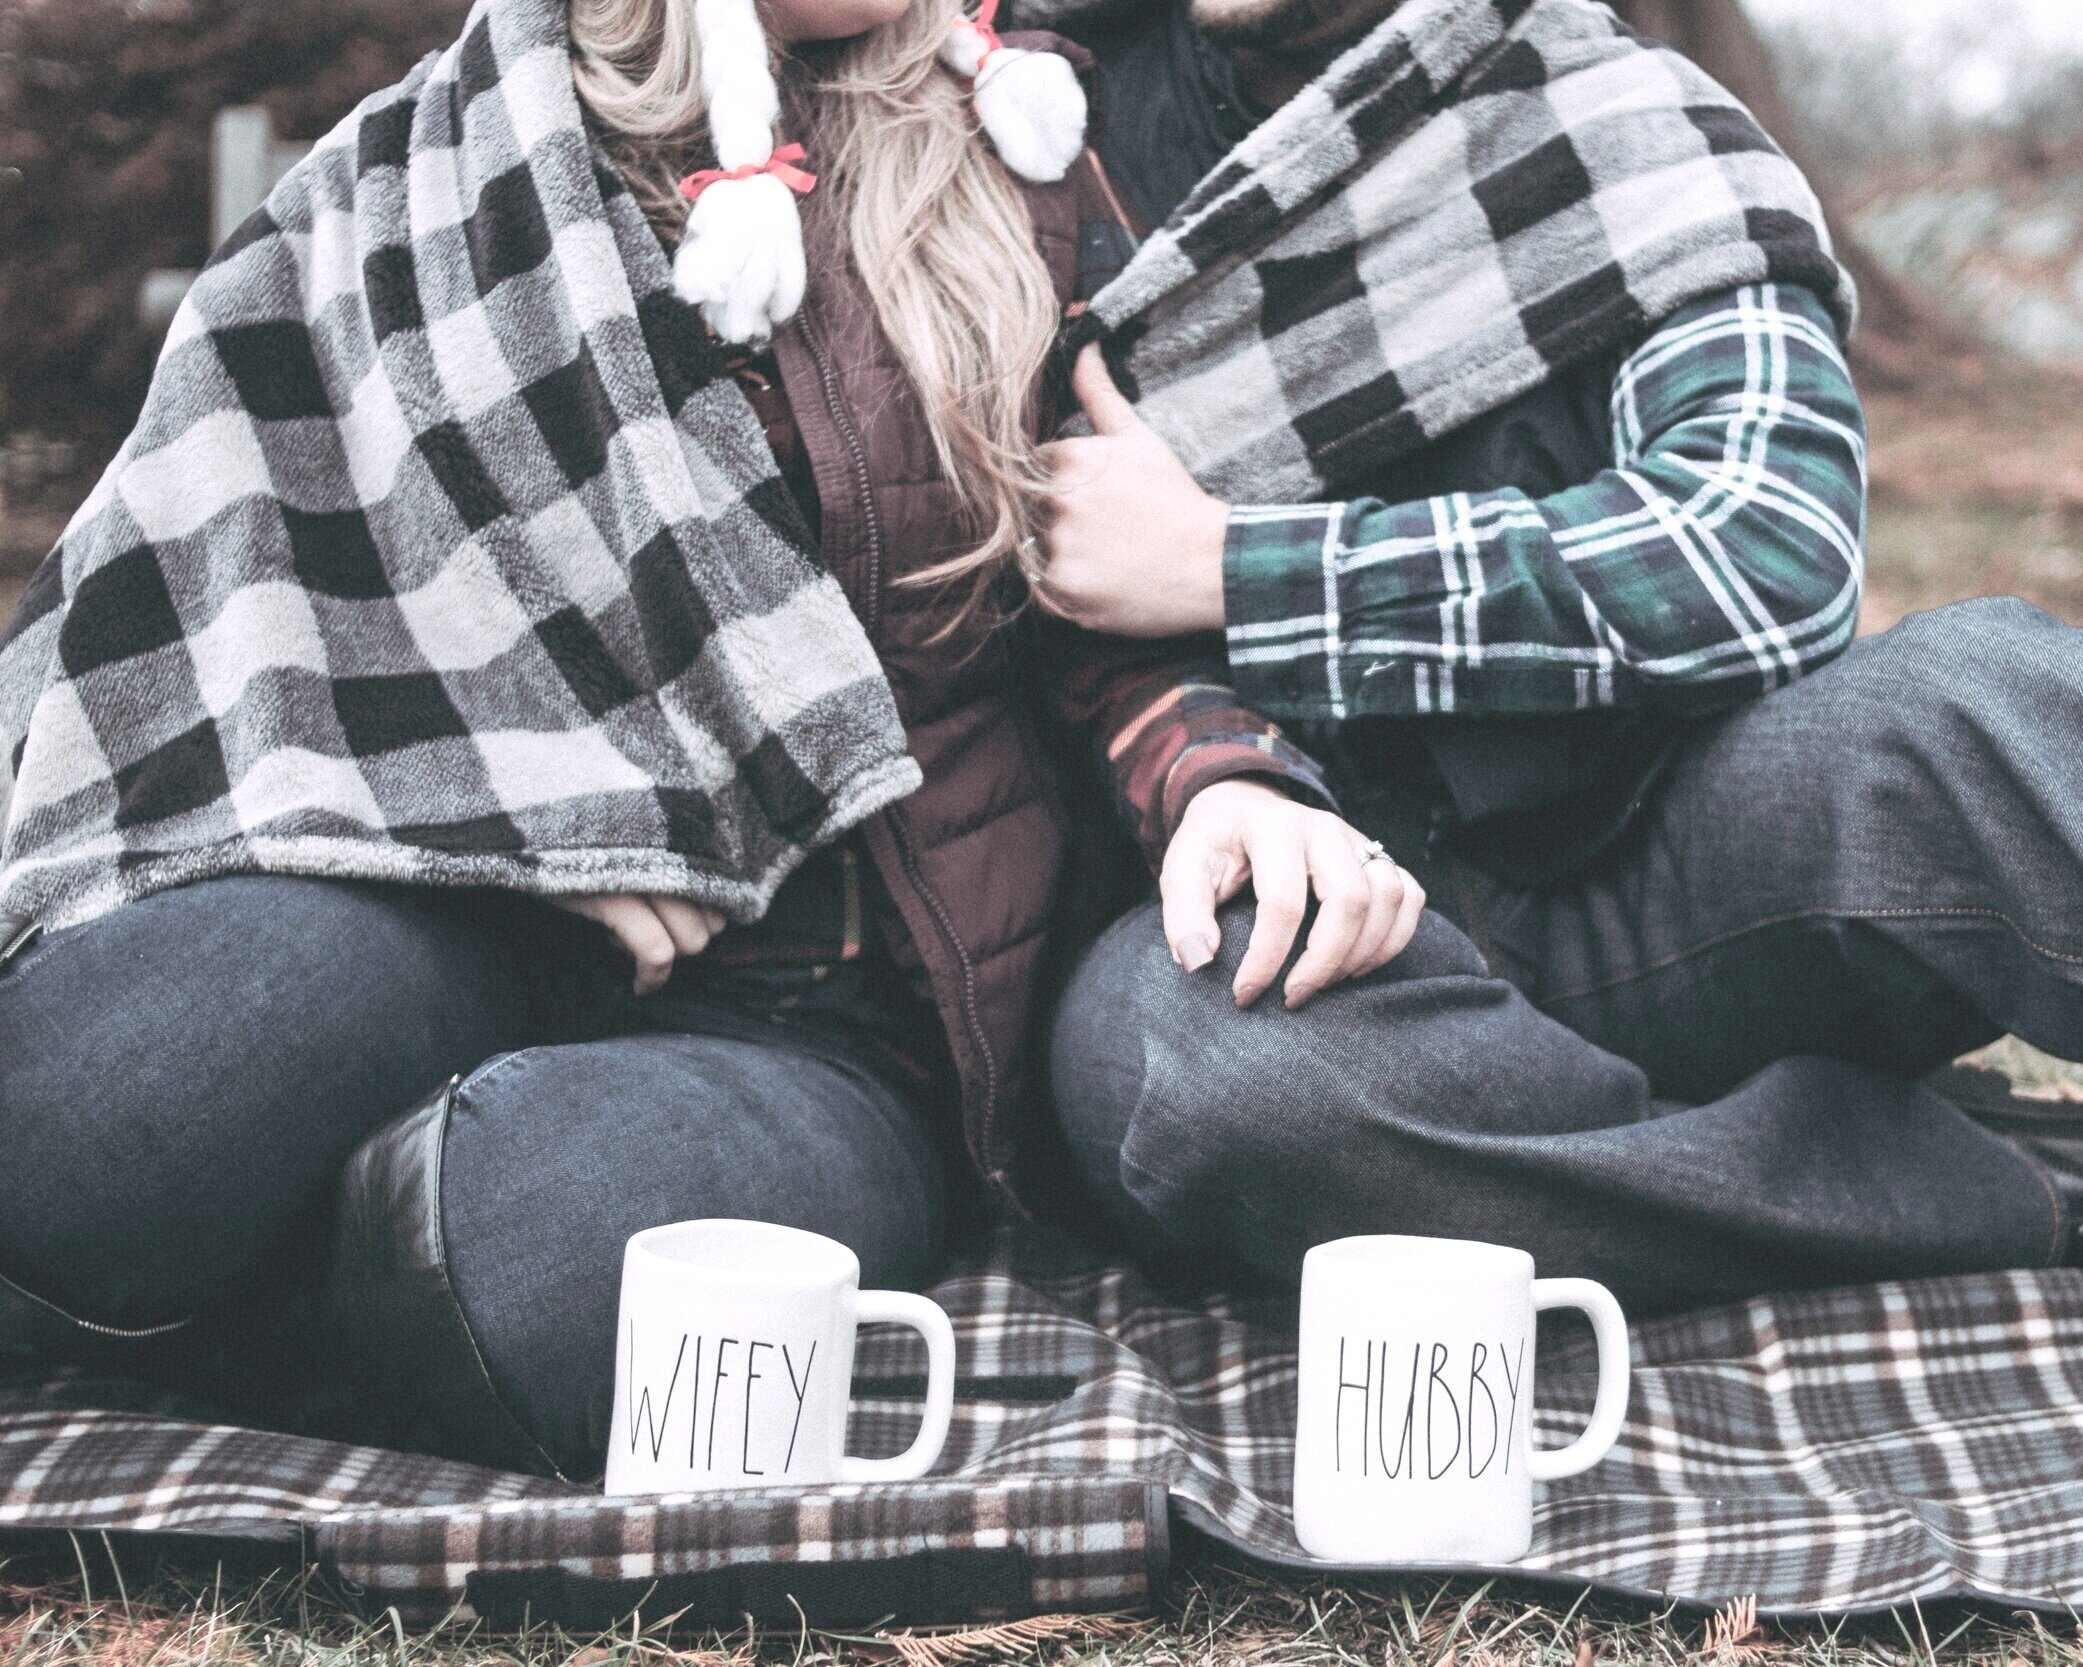 camping+couple+with+mugs+rodolfo-sanches-carvalho-471269-unsplash.jpg